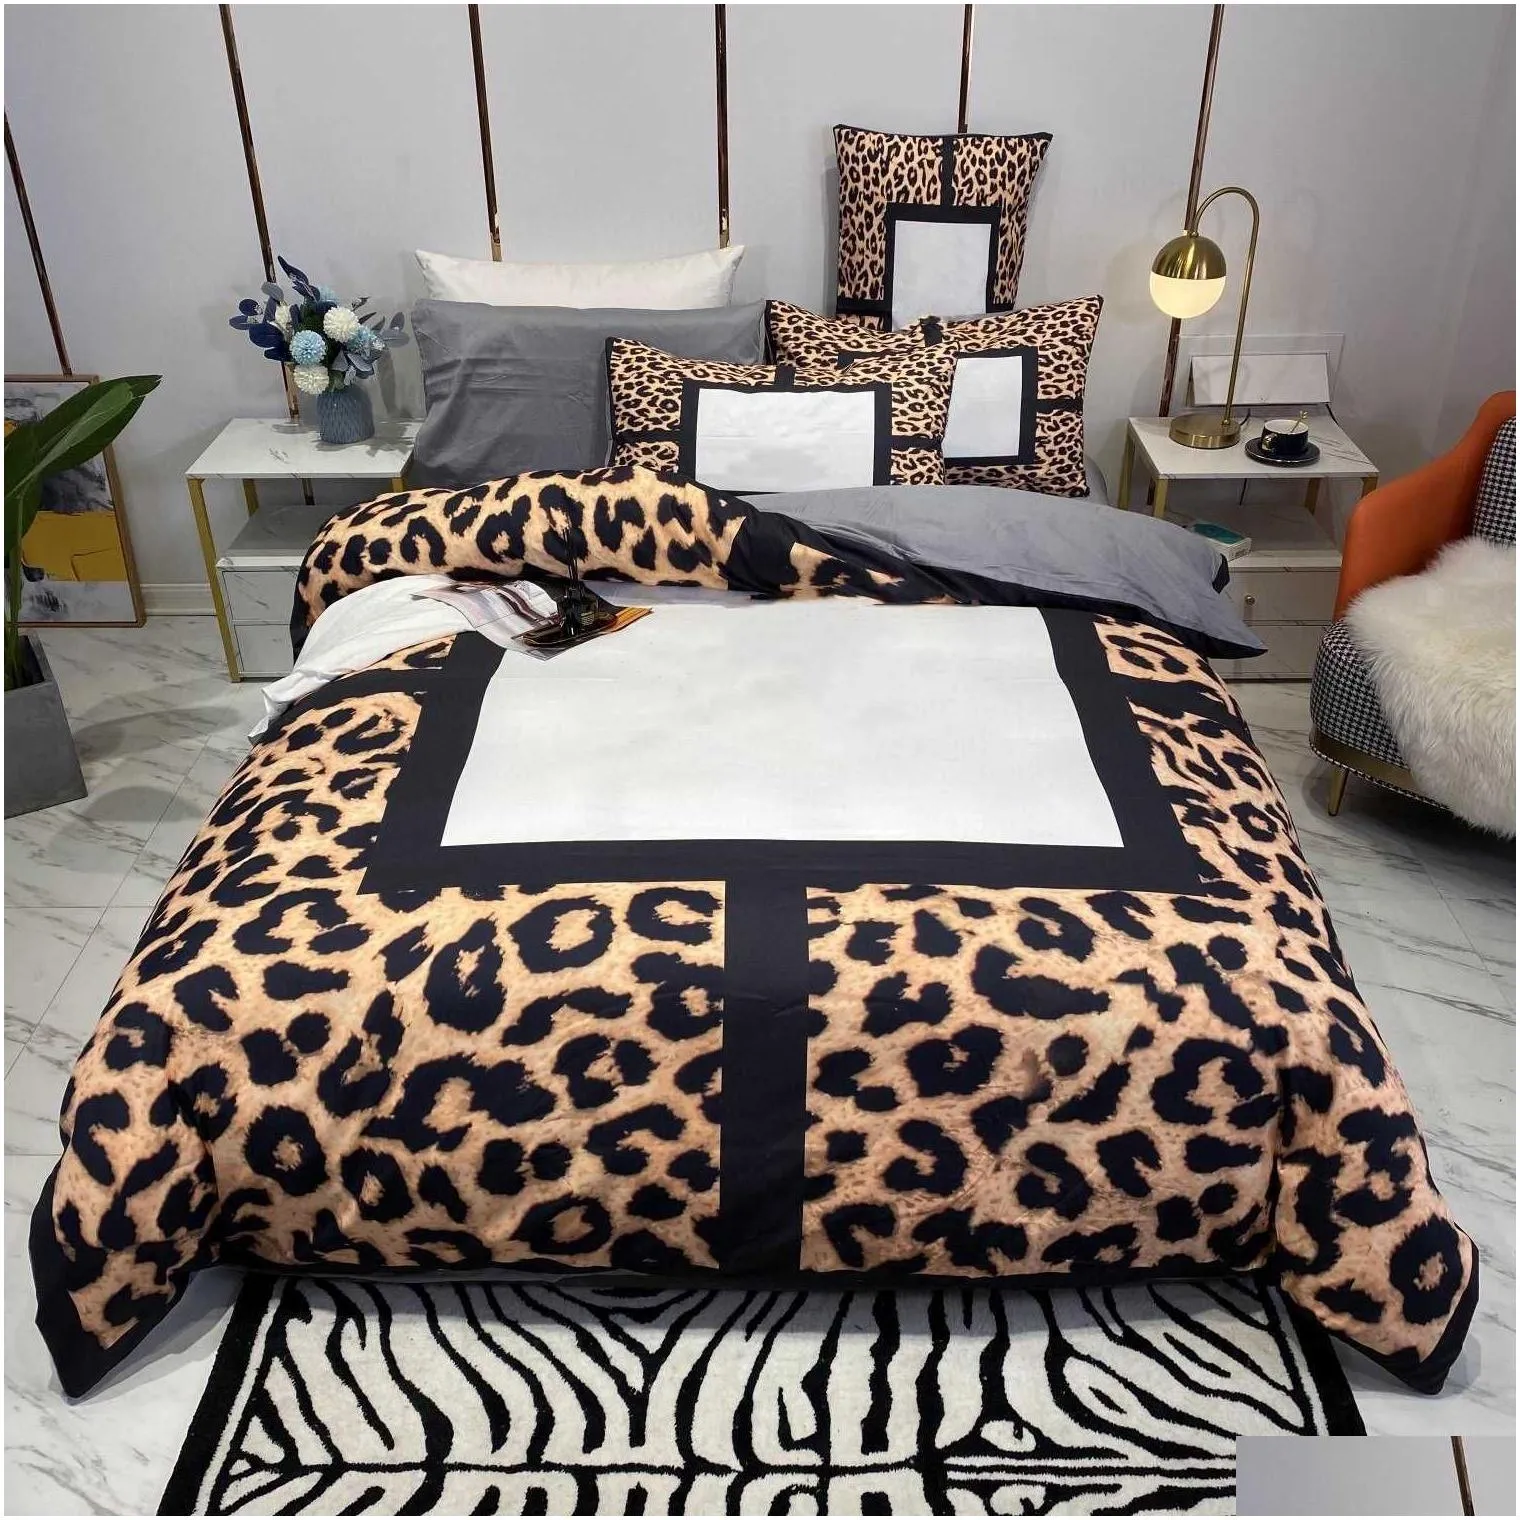 Bedding Sets Letter Printed Designer Queen King Size Duvet Cover Bed Sheet With Pillowcases Fashion Comforter